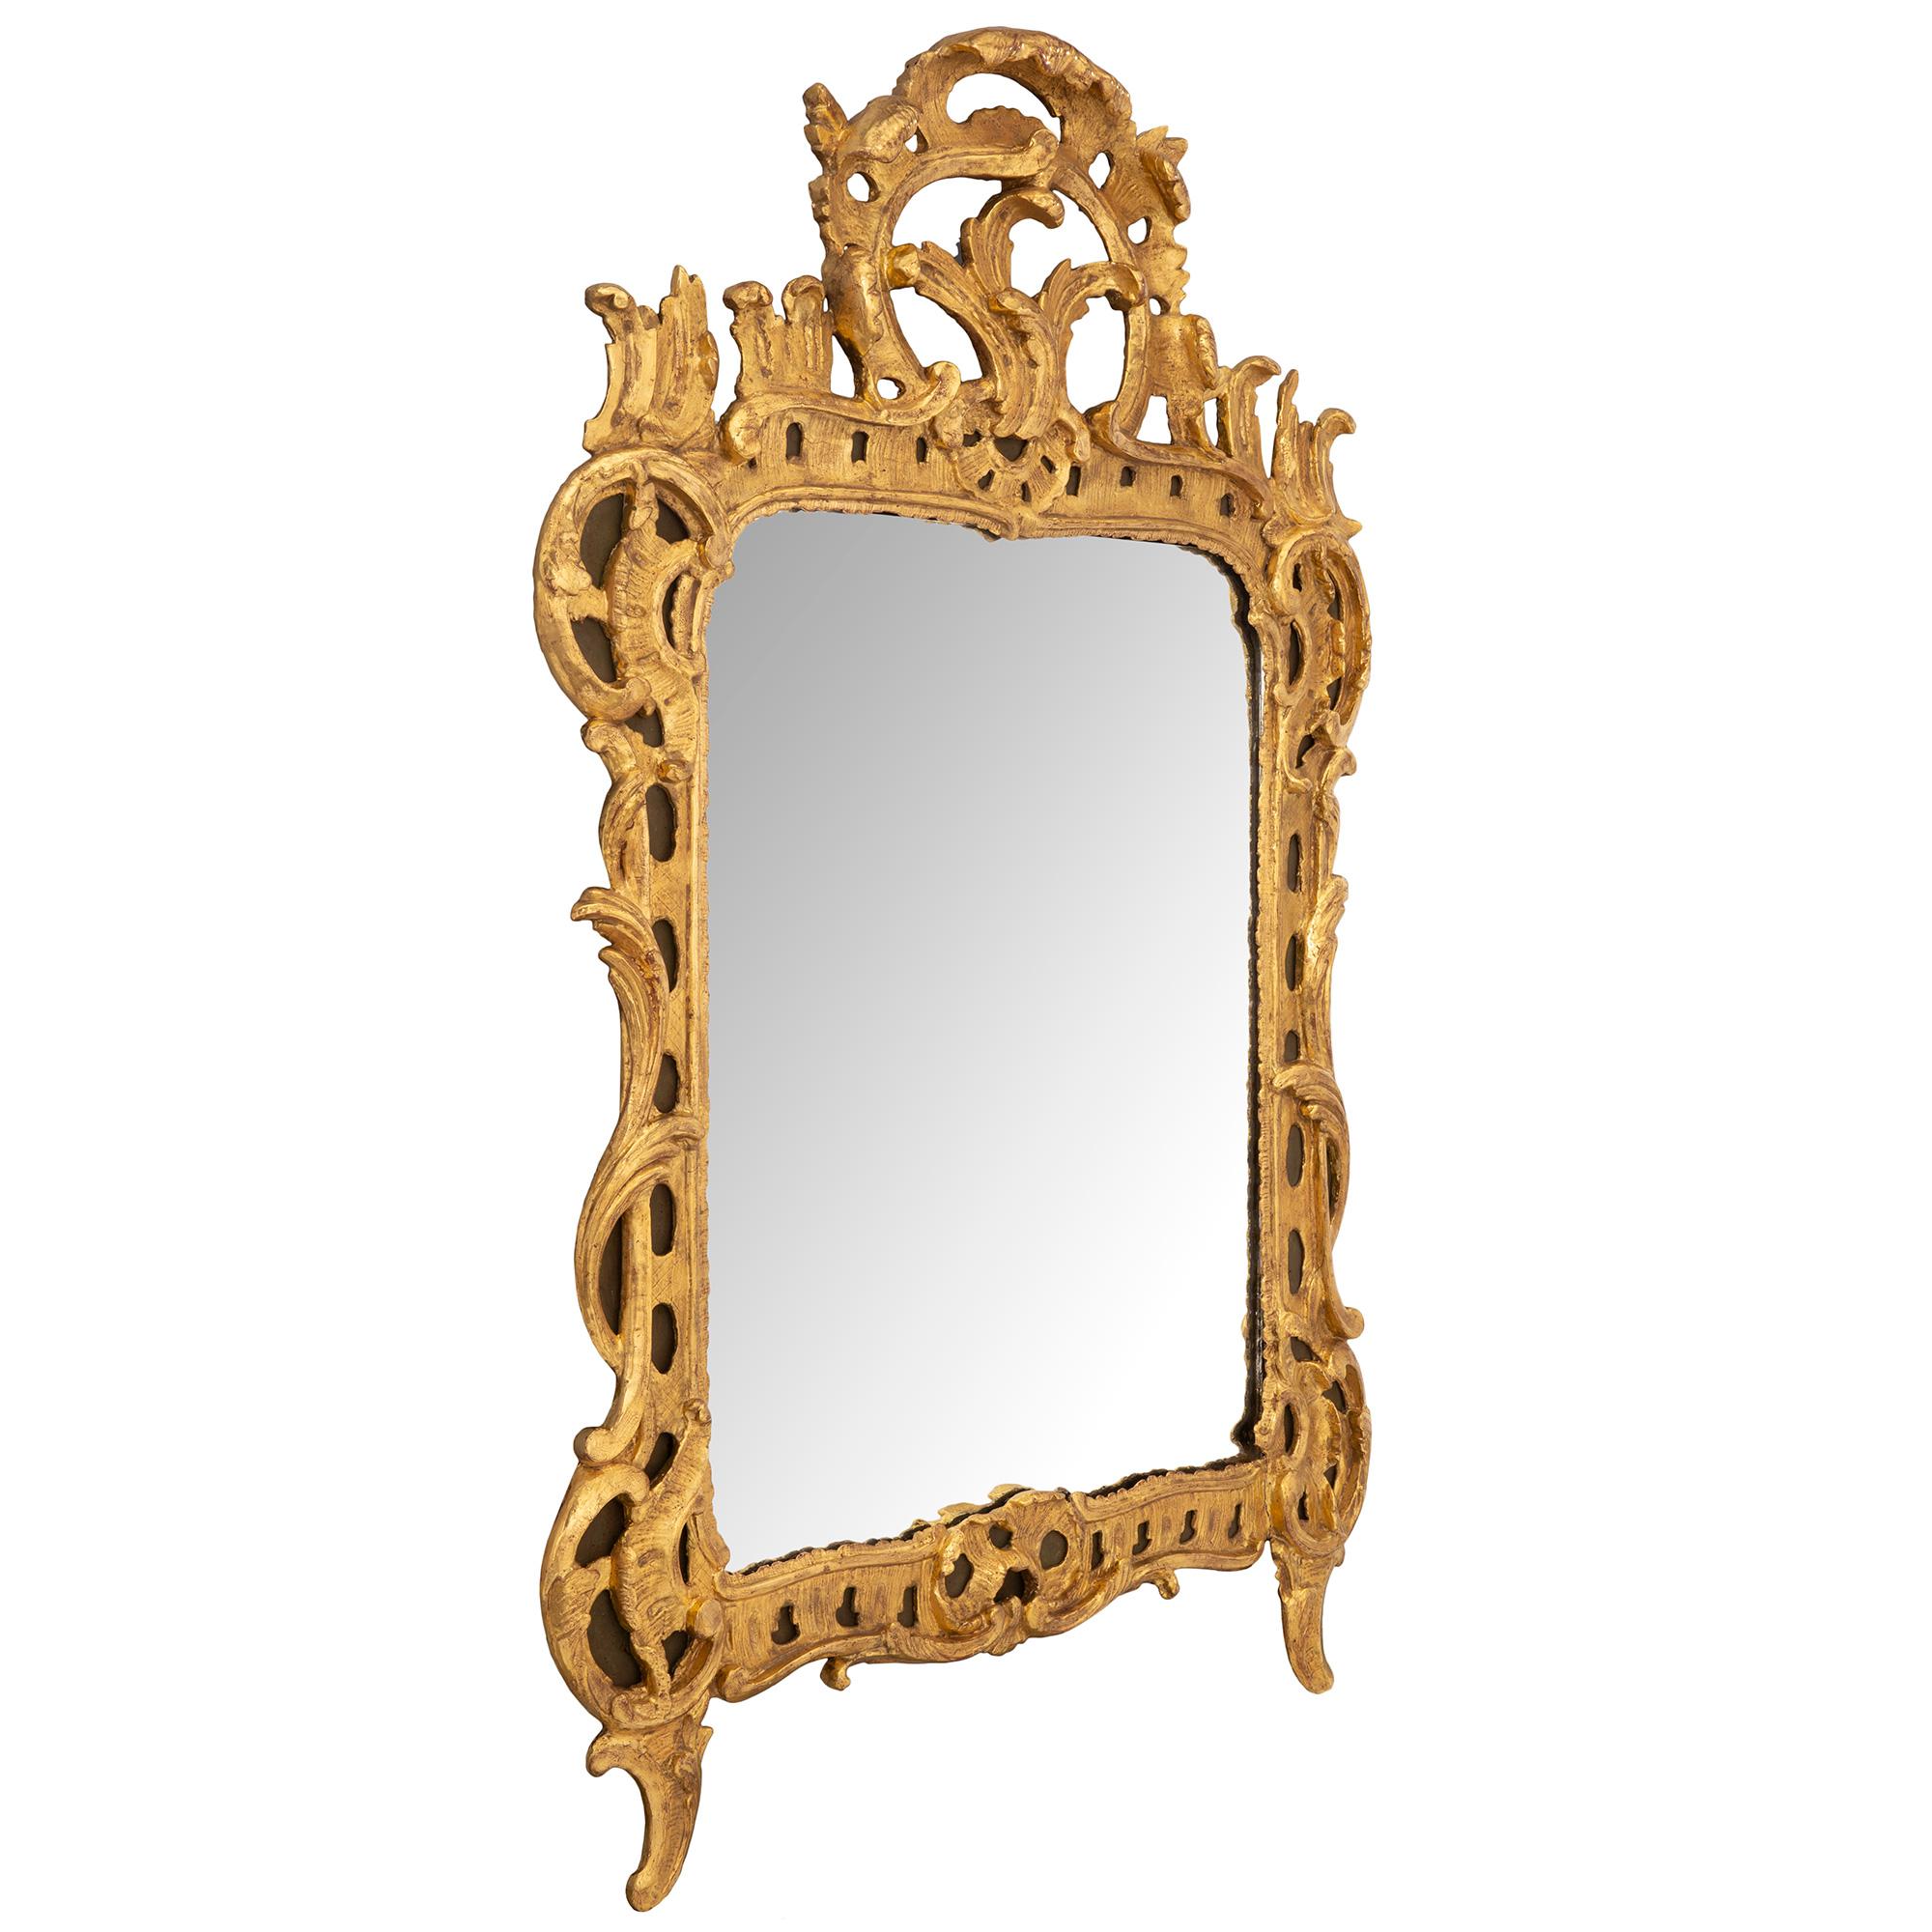 An elegant French 18th century Régence period giltwood mirror. The original mirror plate is framed within a giltwood border with lovely scalloped foliate movements and striking pierced designs. Fine acanthus leaves and giltwood fillets extend up the